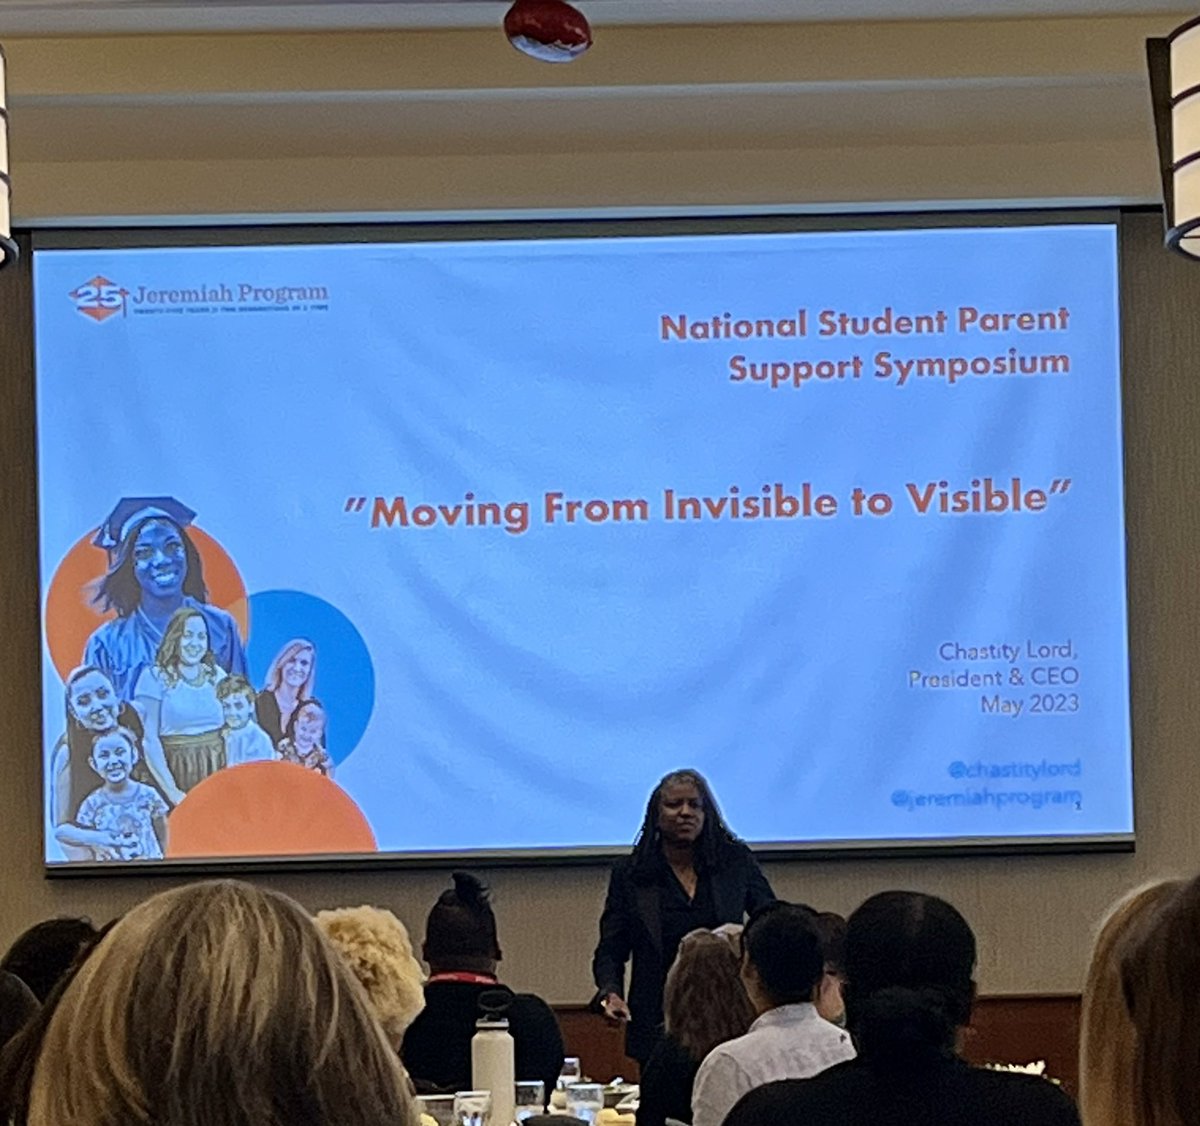 Thrilled to be hearing from   @chastitylord @JeremiahProgram at #2023SPSS who begins by quoting Audre Lorde: people don’t have a single issue struggle bc they don’t live single issue lives.